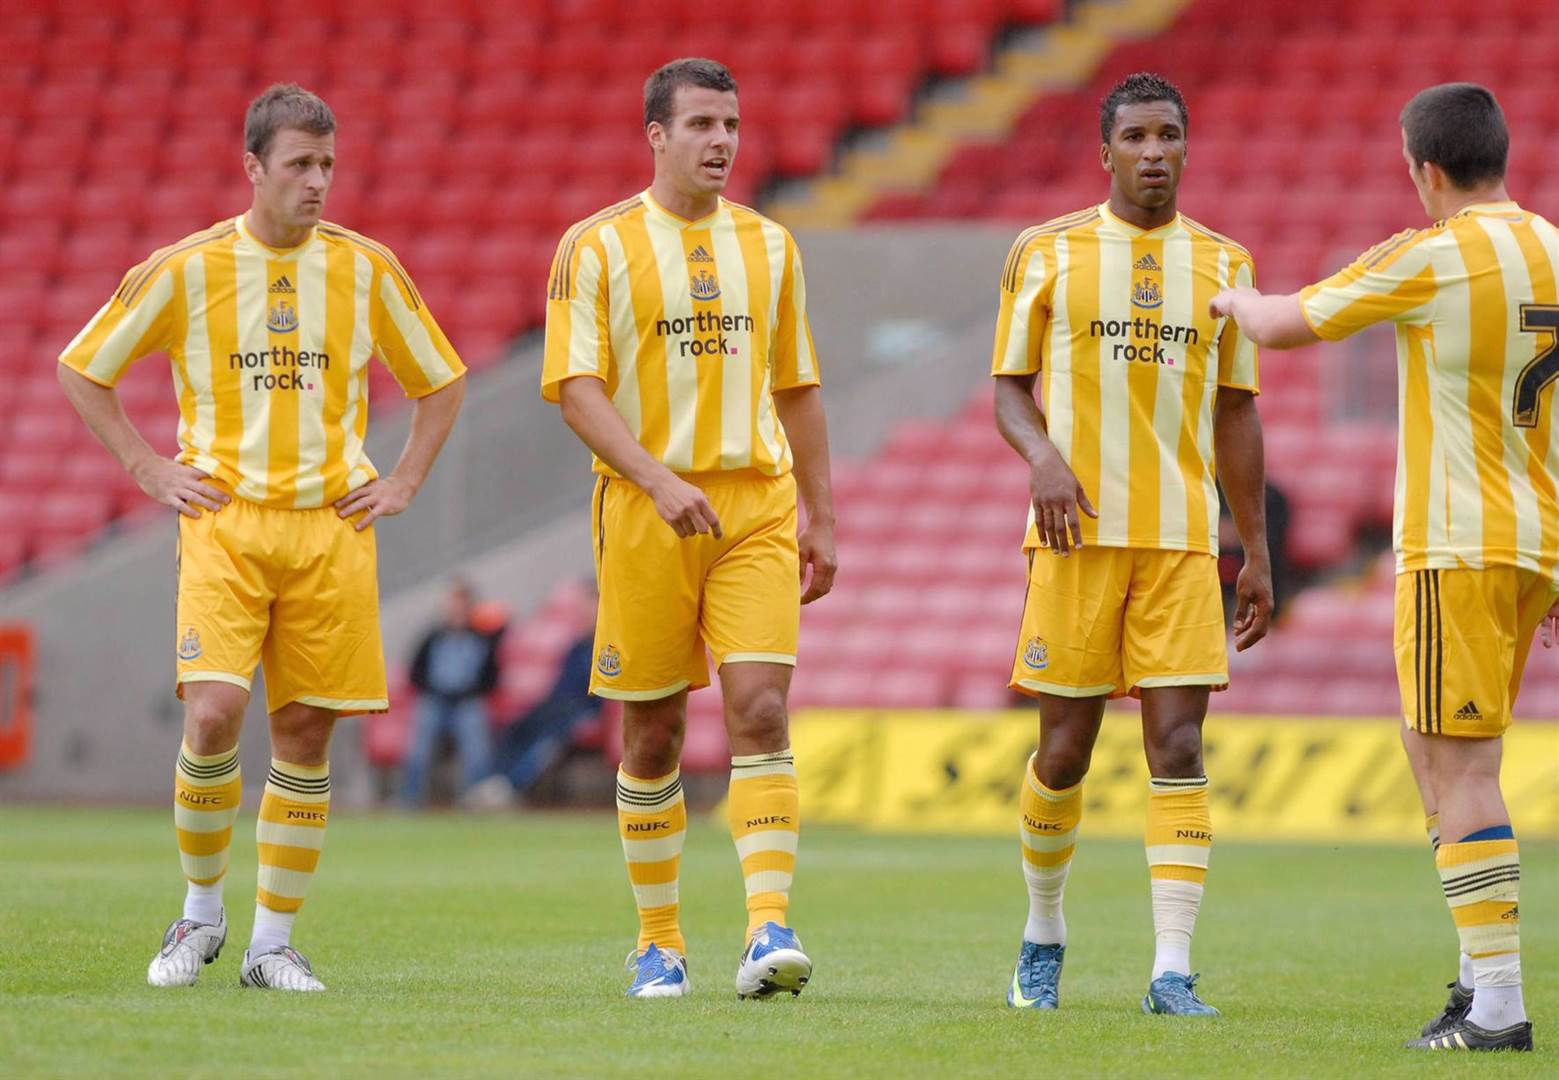 Top 10 worst football kits of all time